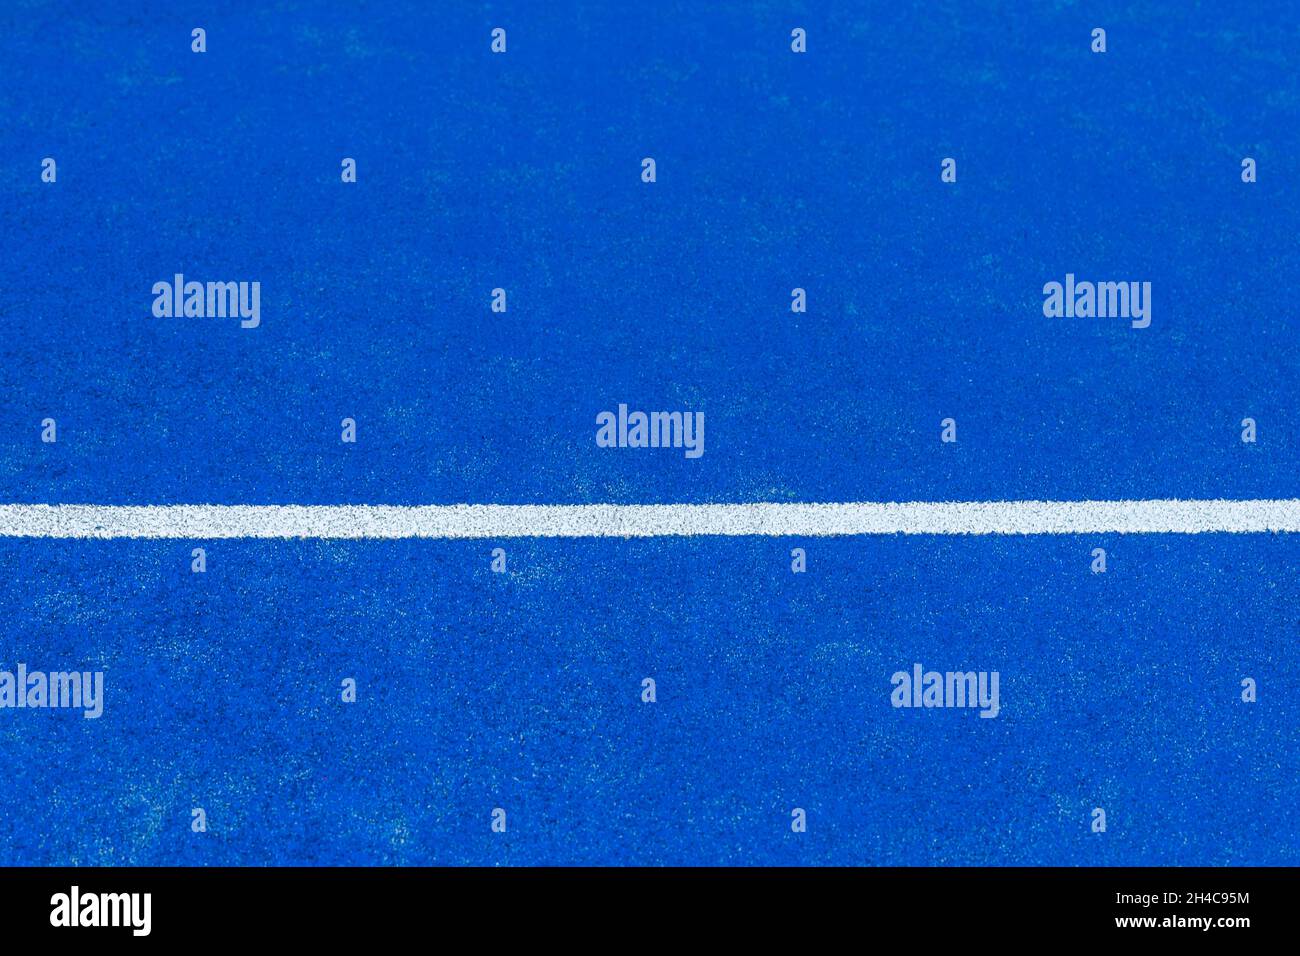 Blue paddle tennis court. Blue court with white lines. Horizontal sport poster, greeting cards, headers, website Stock Photo